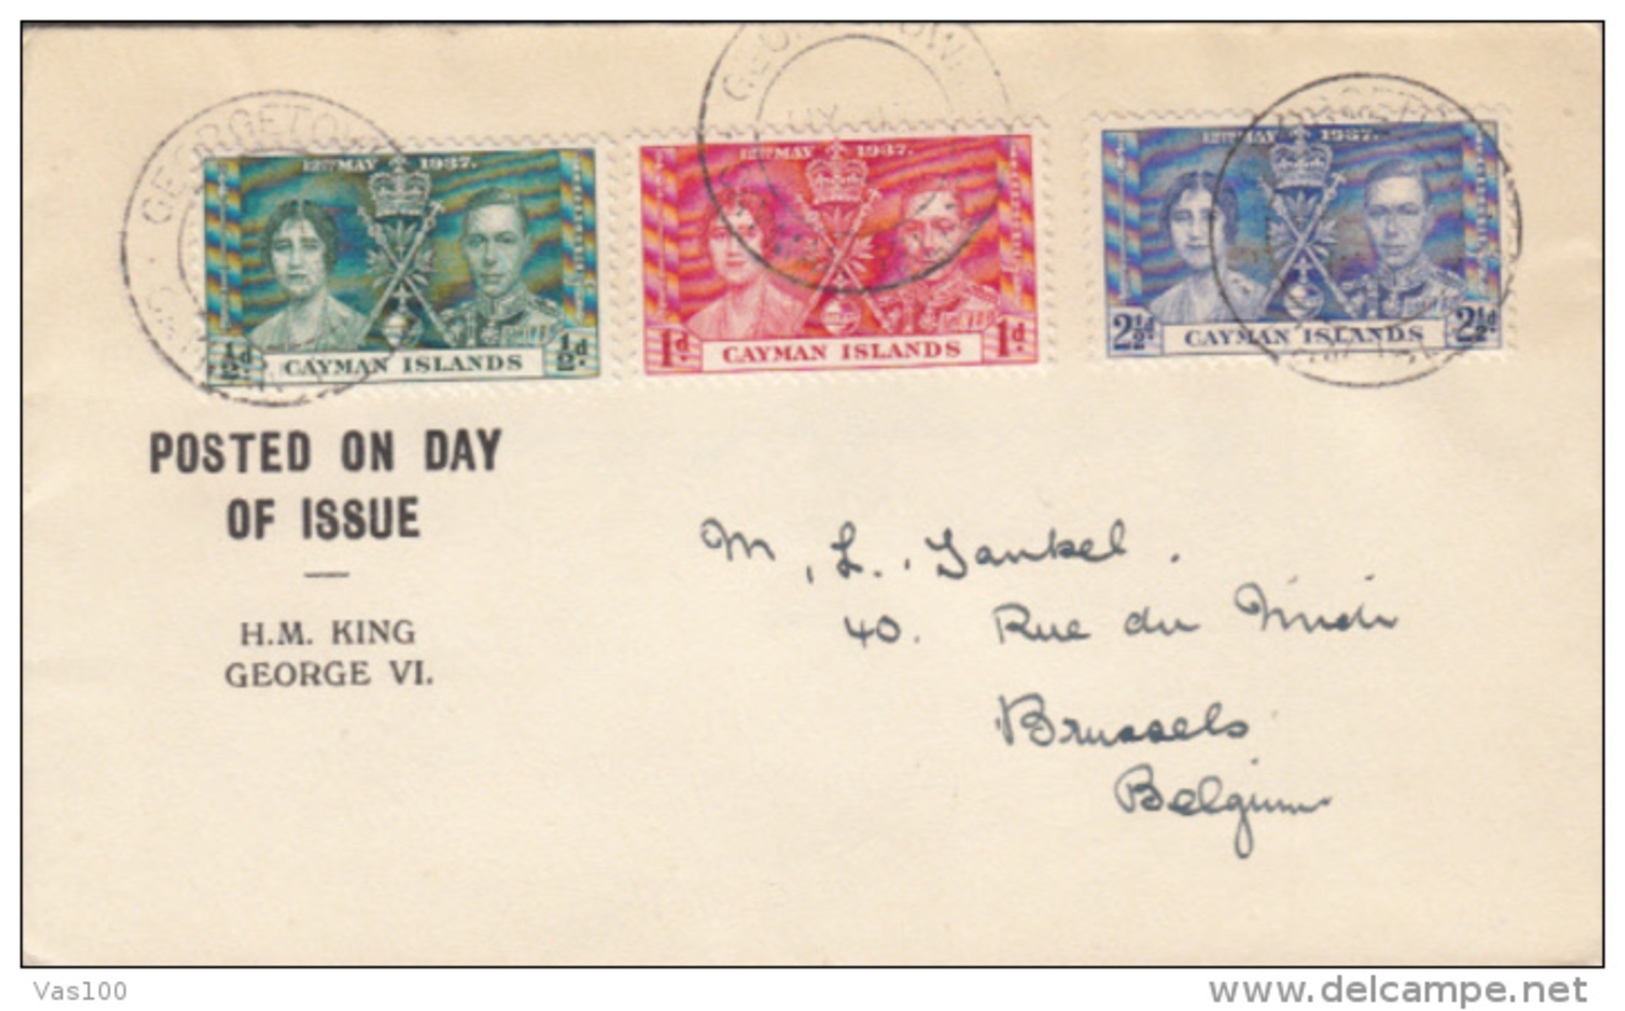 KING GEORGE VI AND QUEEN ELISABETH CORONATION, STAMPS ON COVER, 1937, BASUTOLAND - 1933-1964 Colonia Britannica